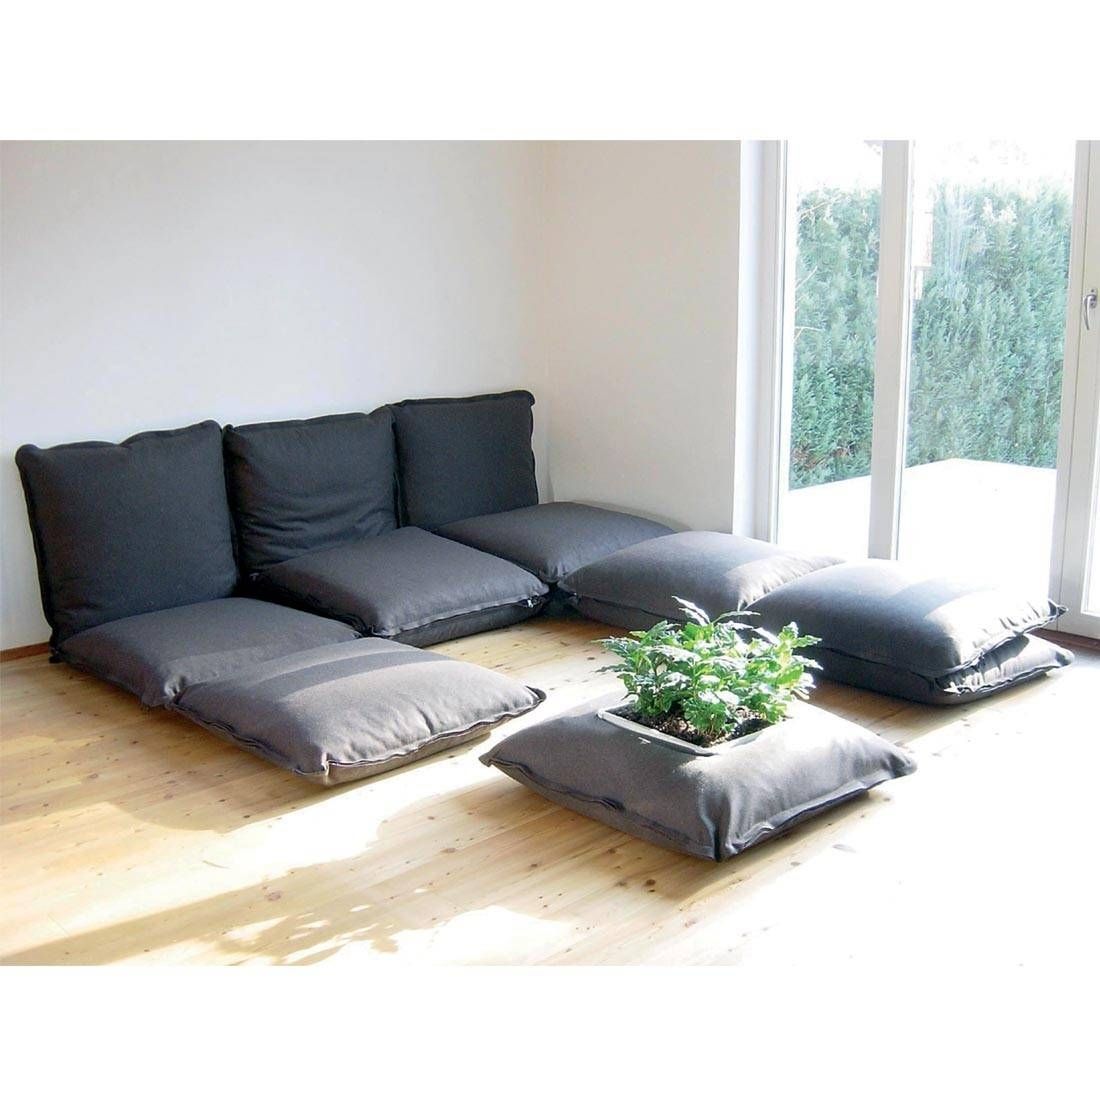 Simple Floor Seating C In Ideas – Miaowan.co Throughout Comfy Floor Seating (Photo 4 of 30)